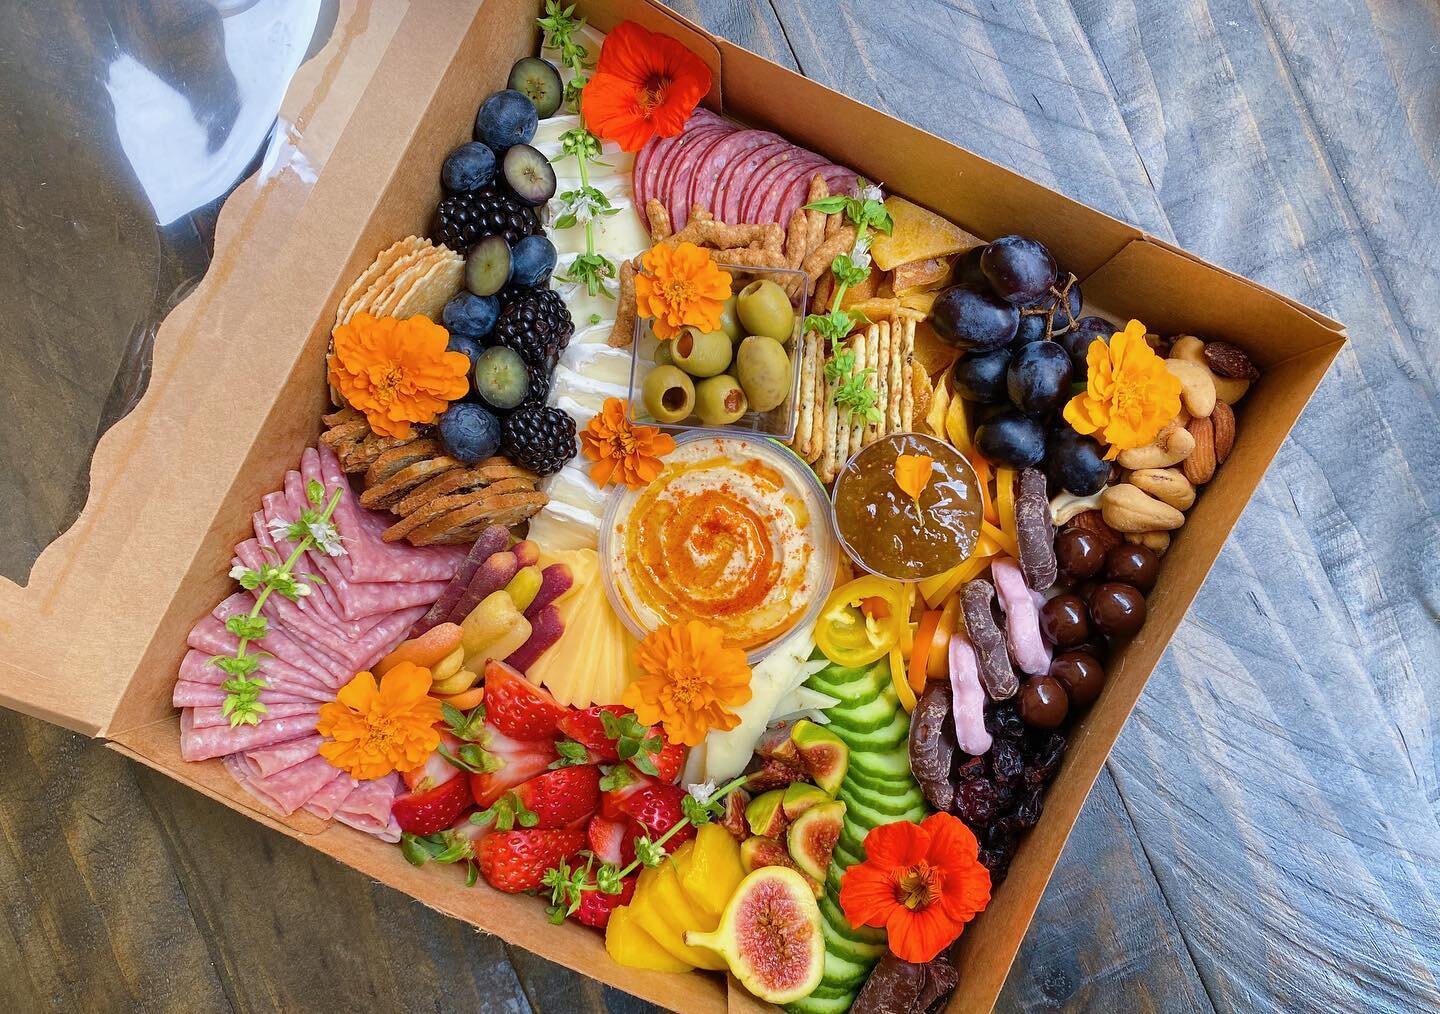 Have you placed an order for this weekend yet? Friday &amp; Saturday are almost completely booked so DM us asap and let us be part of your weekend plans 🤩🥂

(Pictured: Soir&eacute;e Picnic Box)
&bull;
&bull;
&bull;
&bull;
#itsbriethyme #cheeseboard